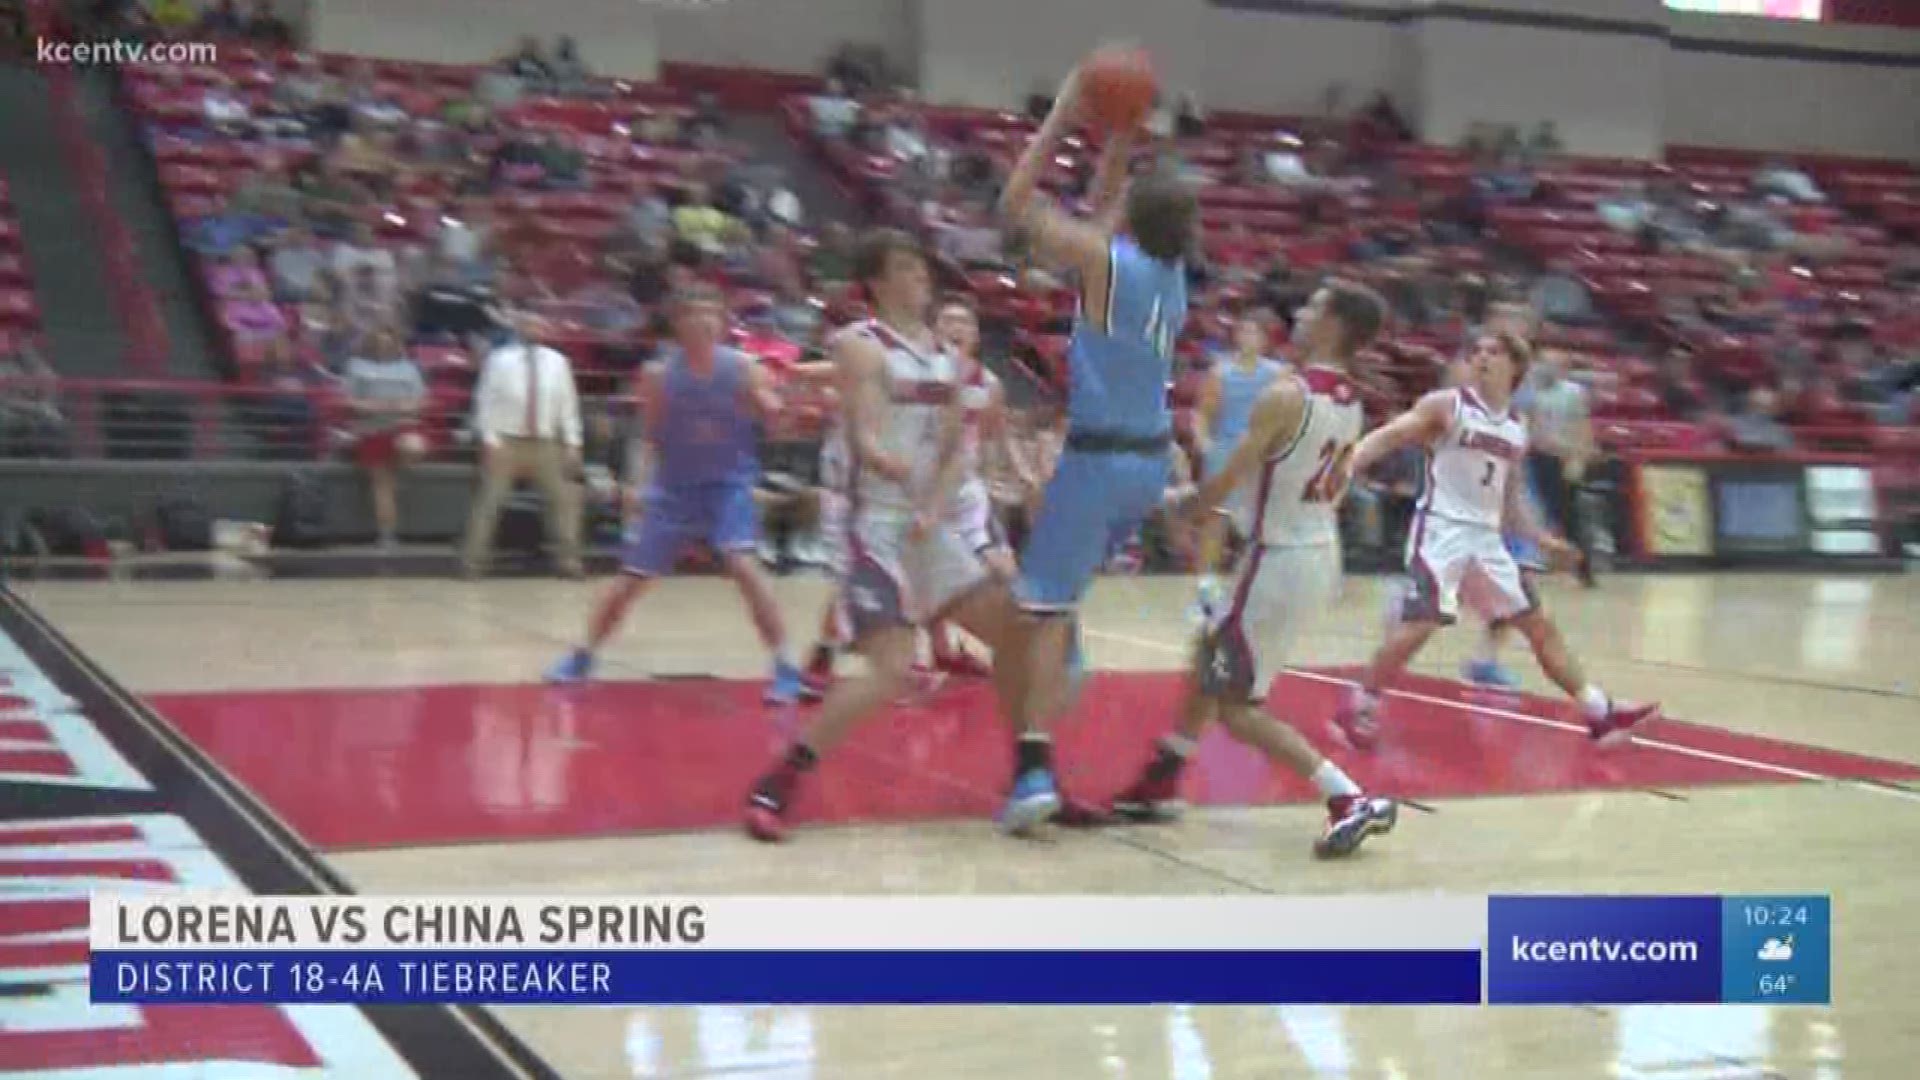 The winner of this showdown locked up the No. 1 seed in the playoffs. China Spring got the win, and the top spot, 71-65.